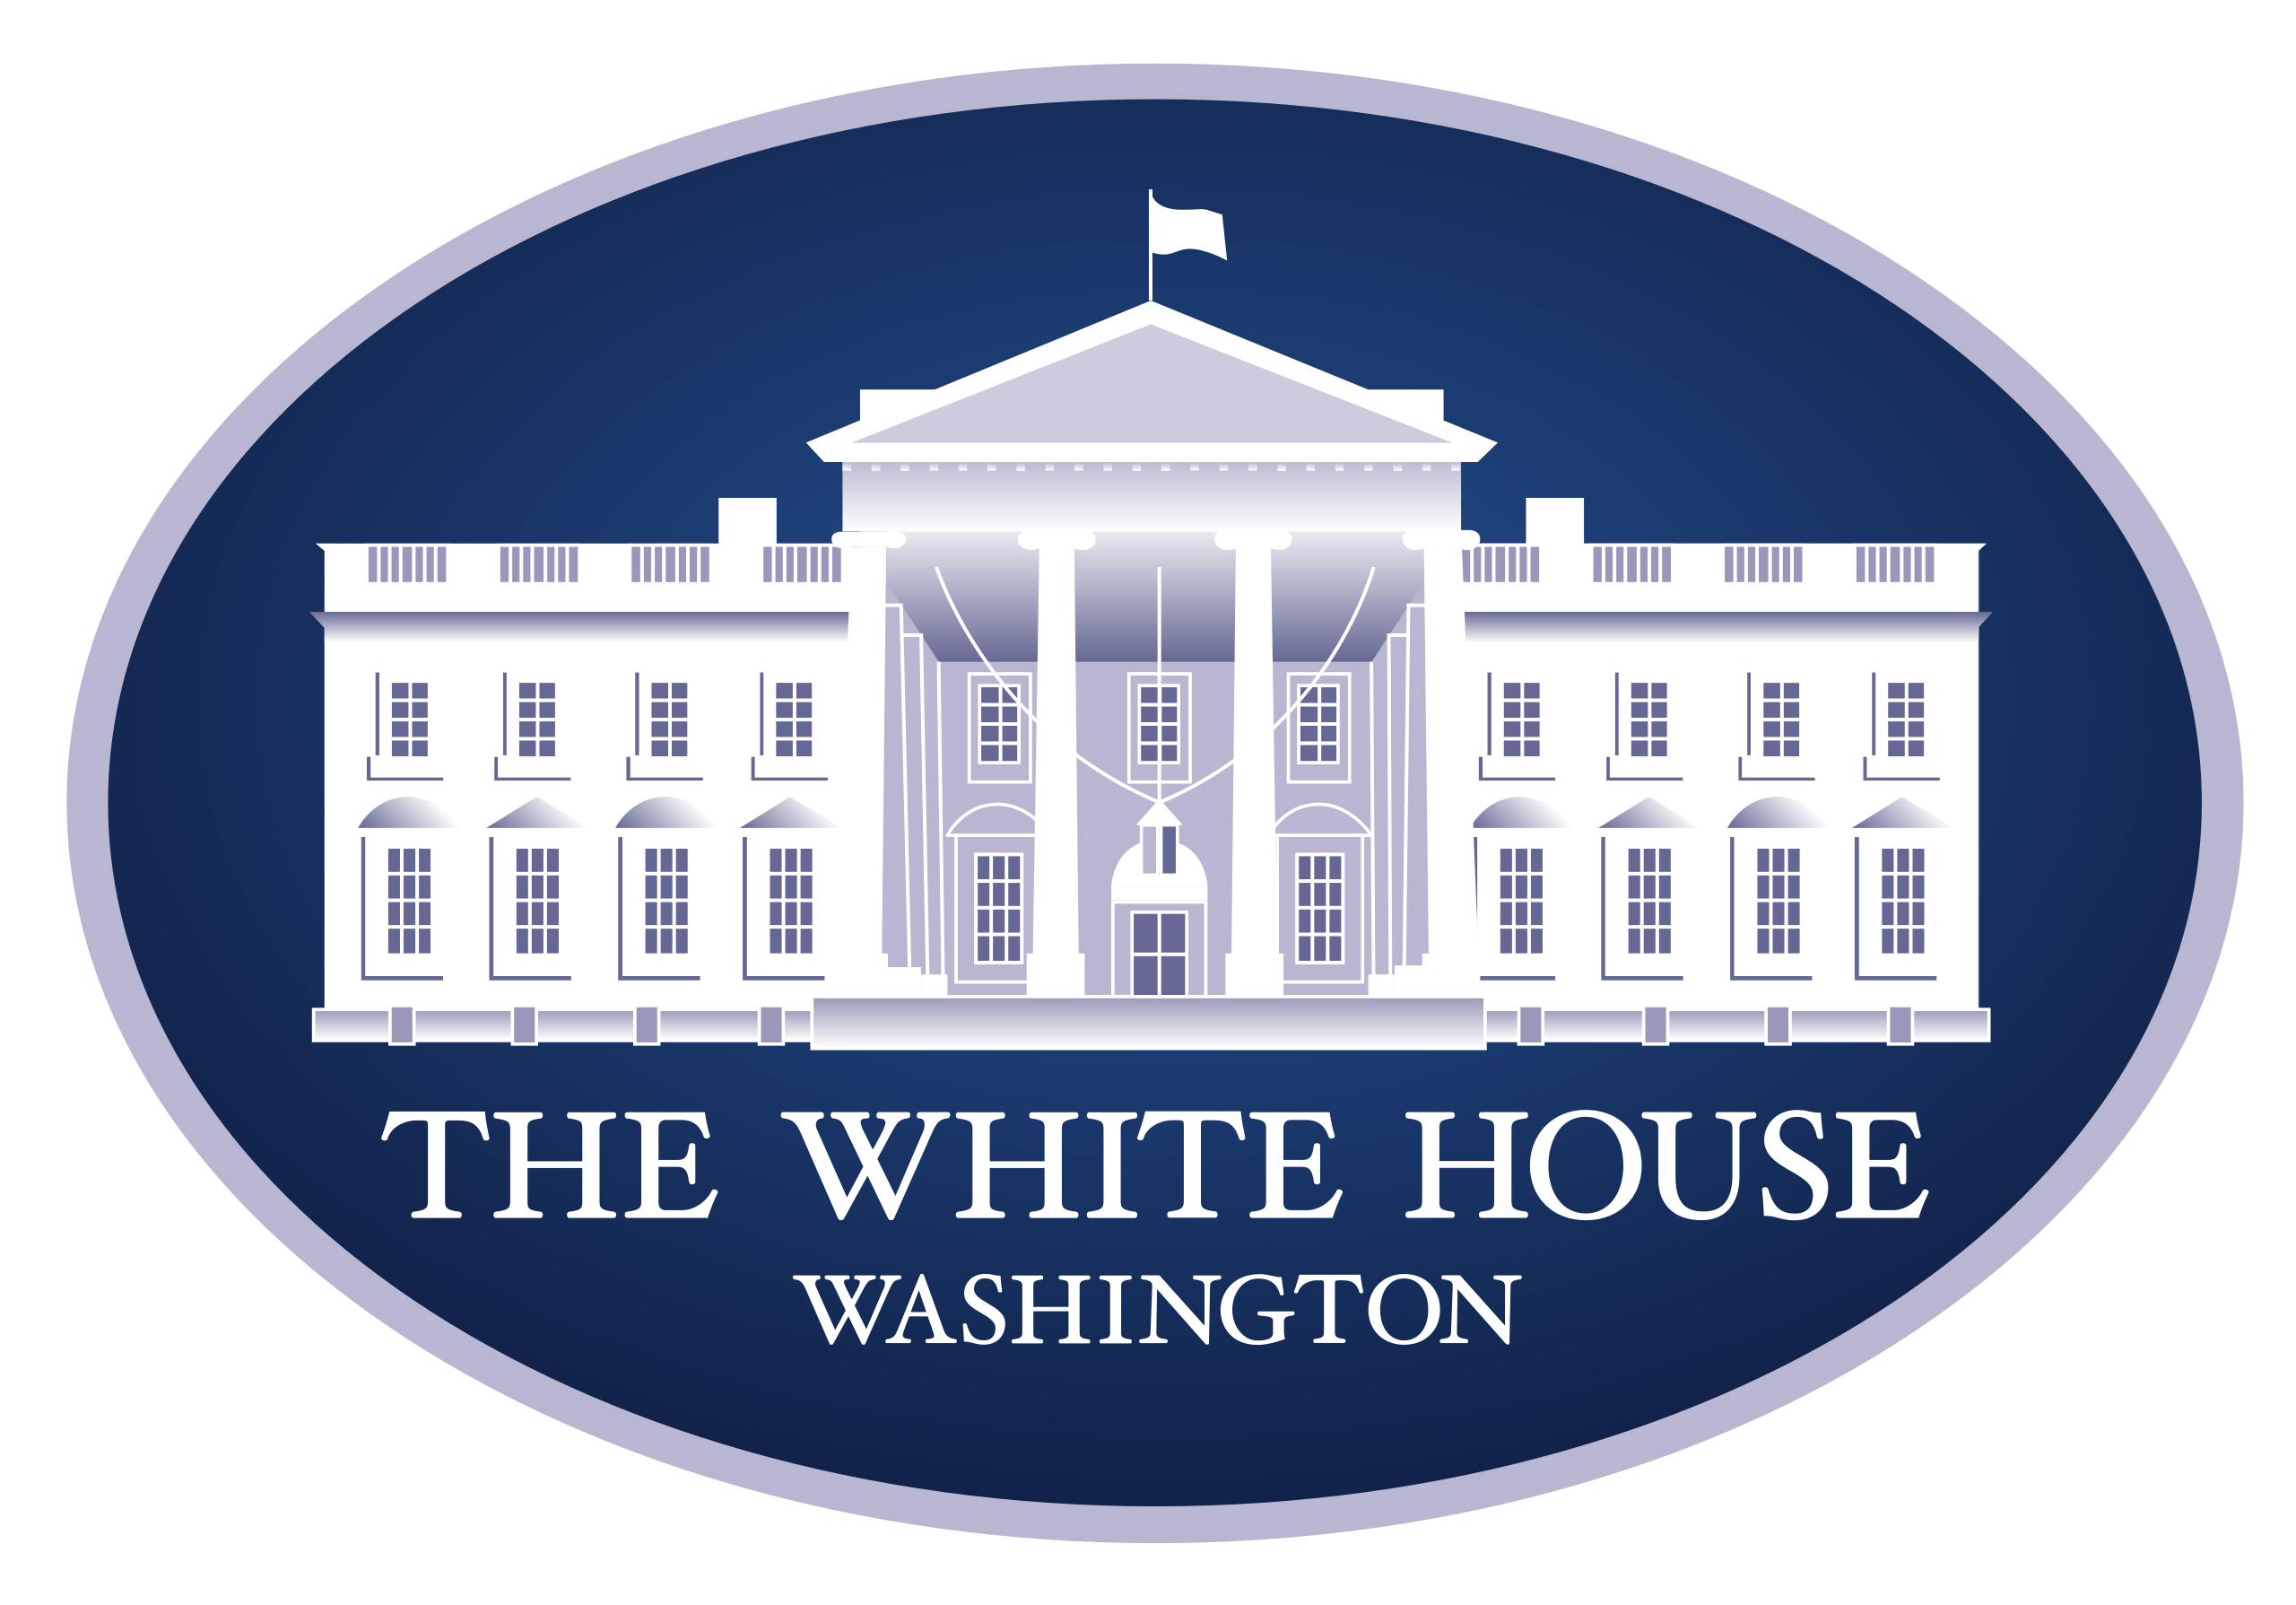 White House Champion of Change for Open Innovation